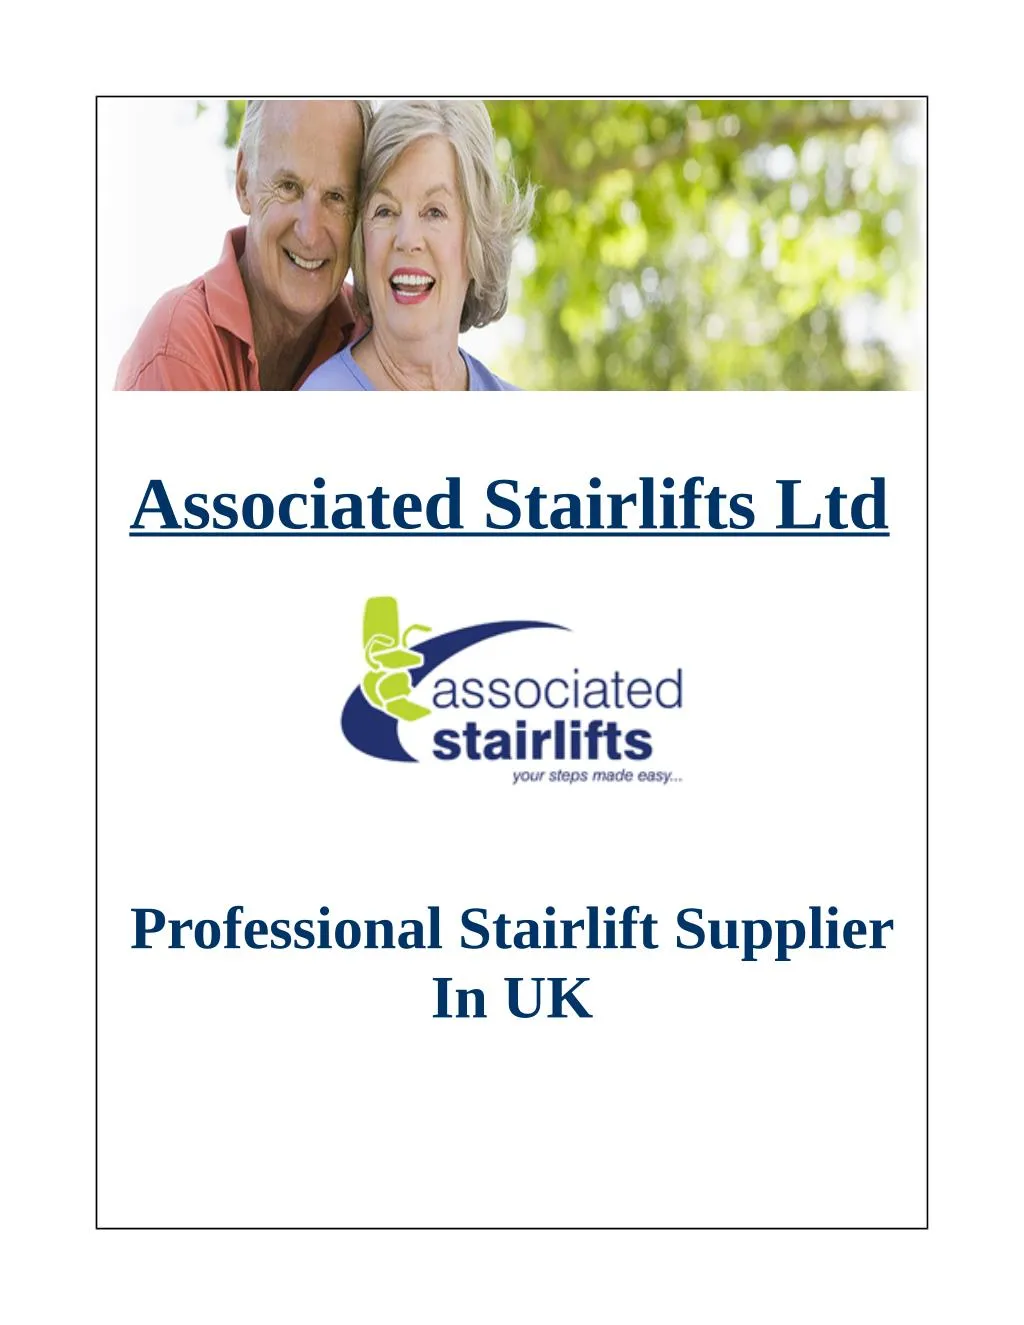 associated stairlifts ltd